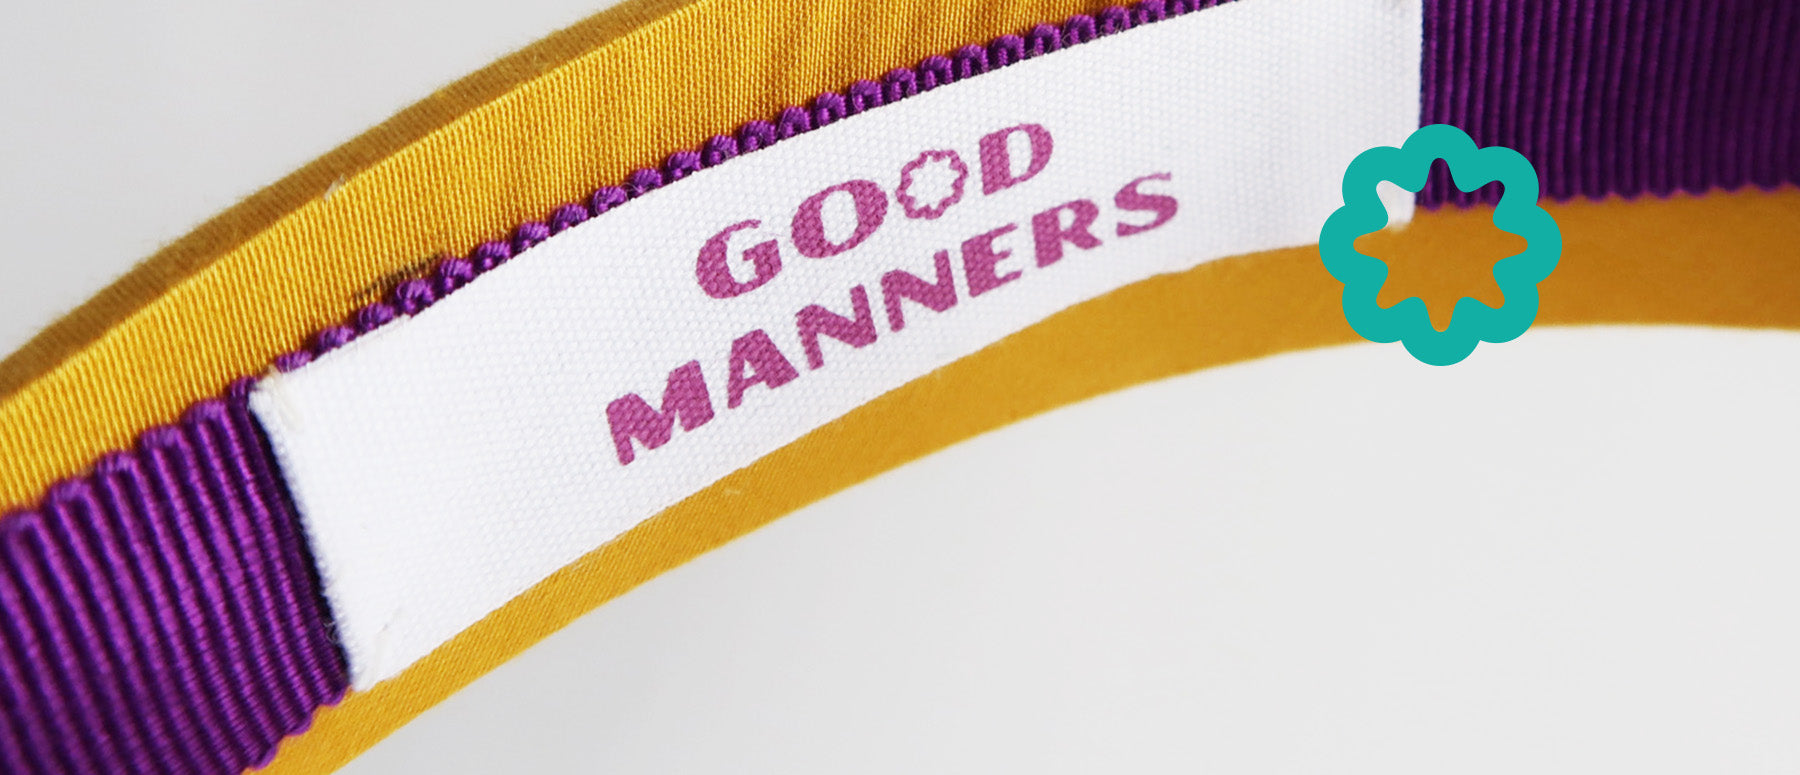 good manners style yellow headband close up of label detail